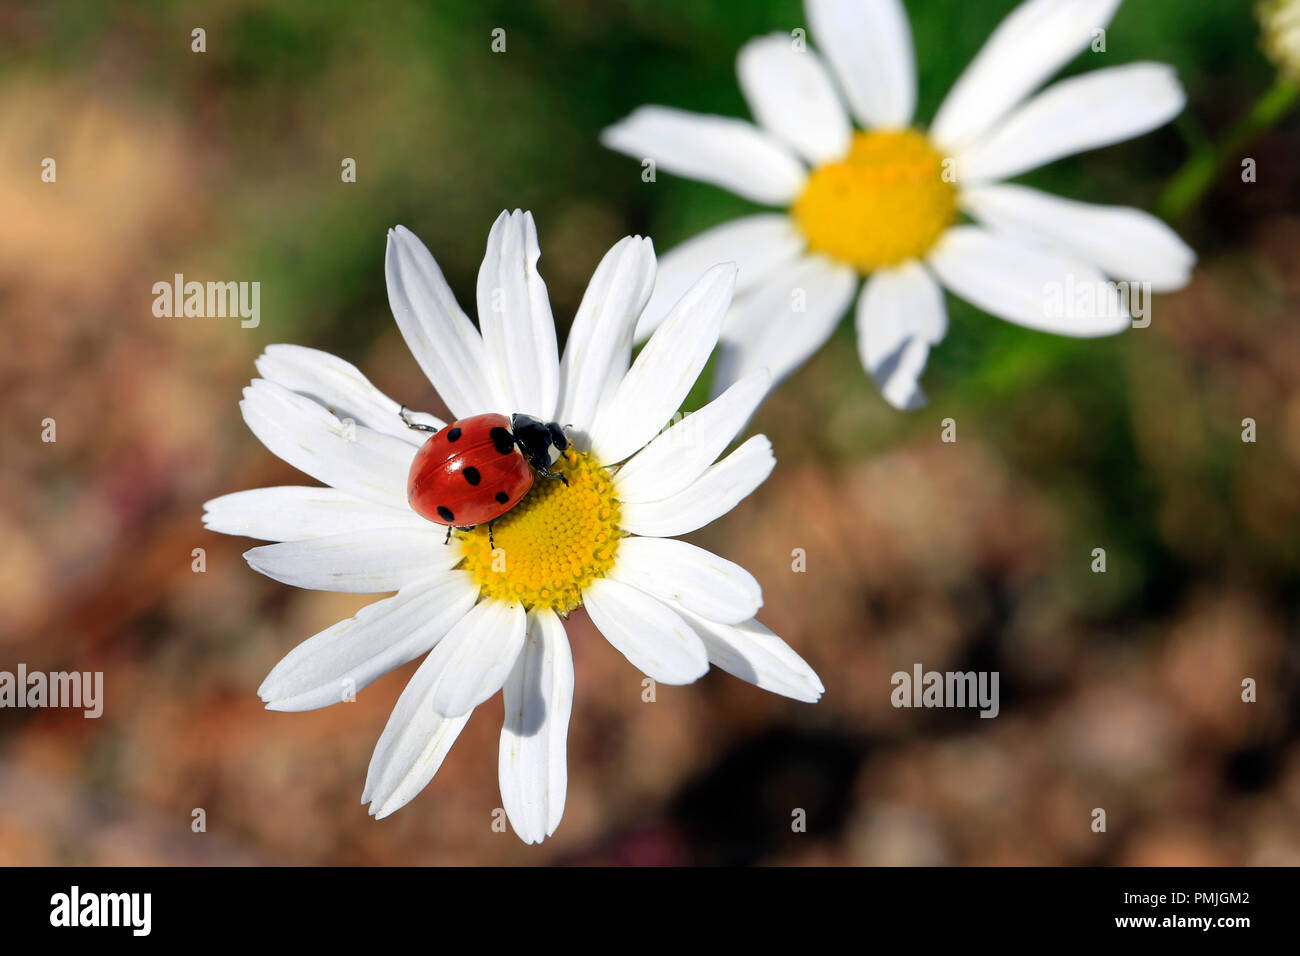 Seven Spotted Ladybug, Coccinella septempunctata, on the yellow florets of an Oxeye Daisy flower. Stock Photo